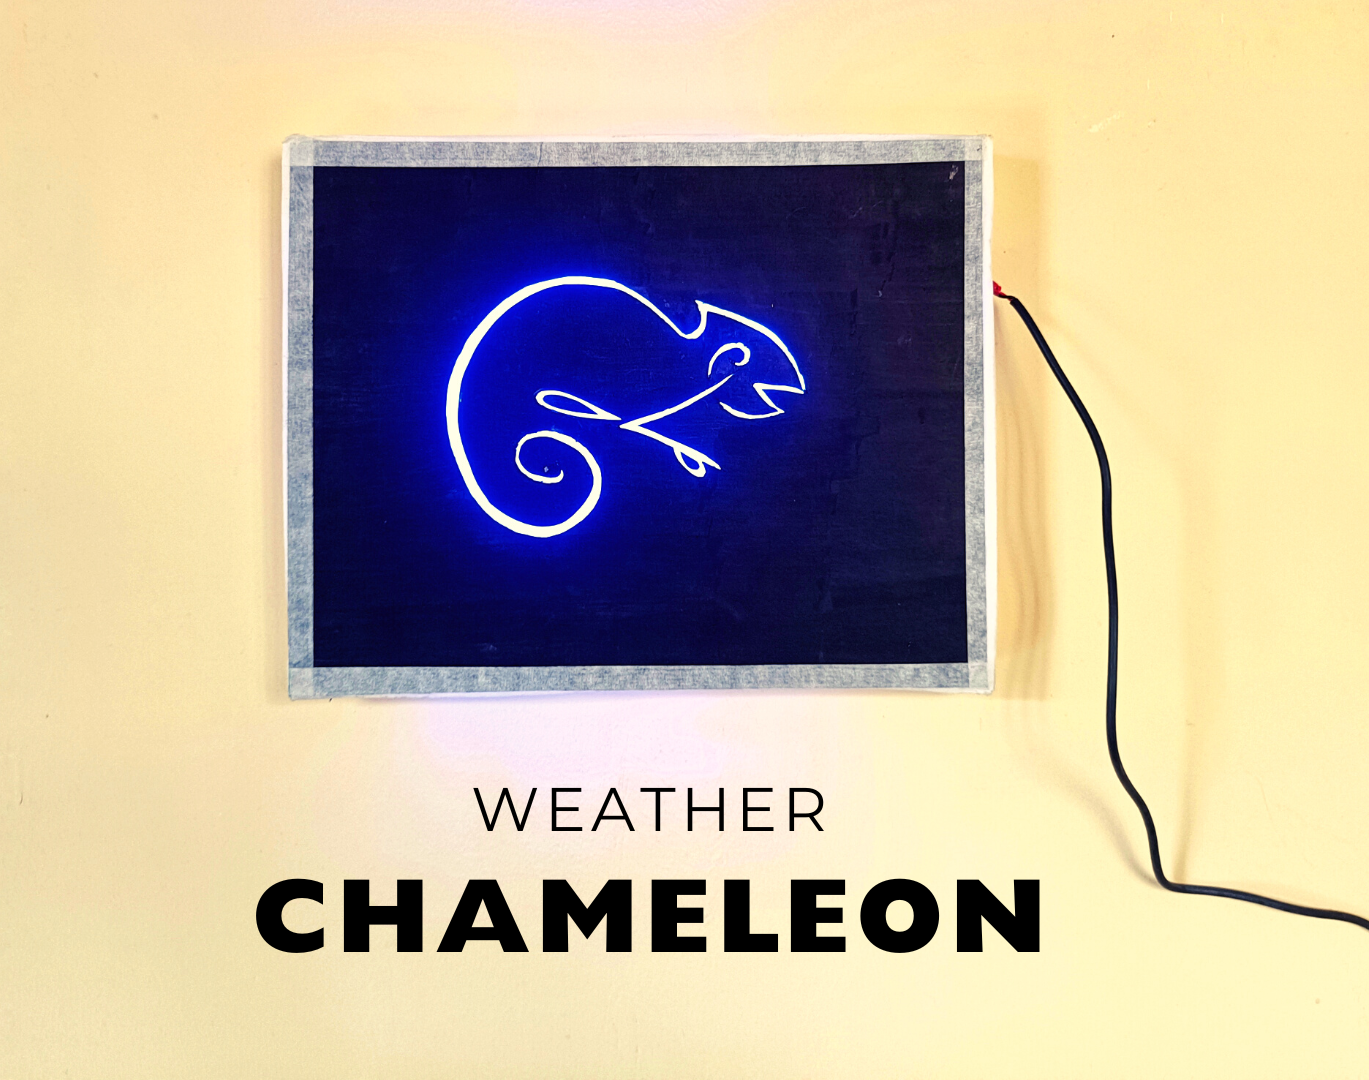 Chameleon Artwork That Changes Color With the Weather